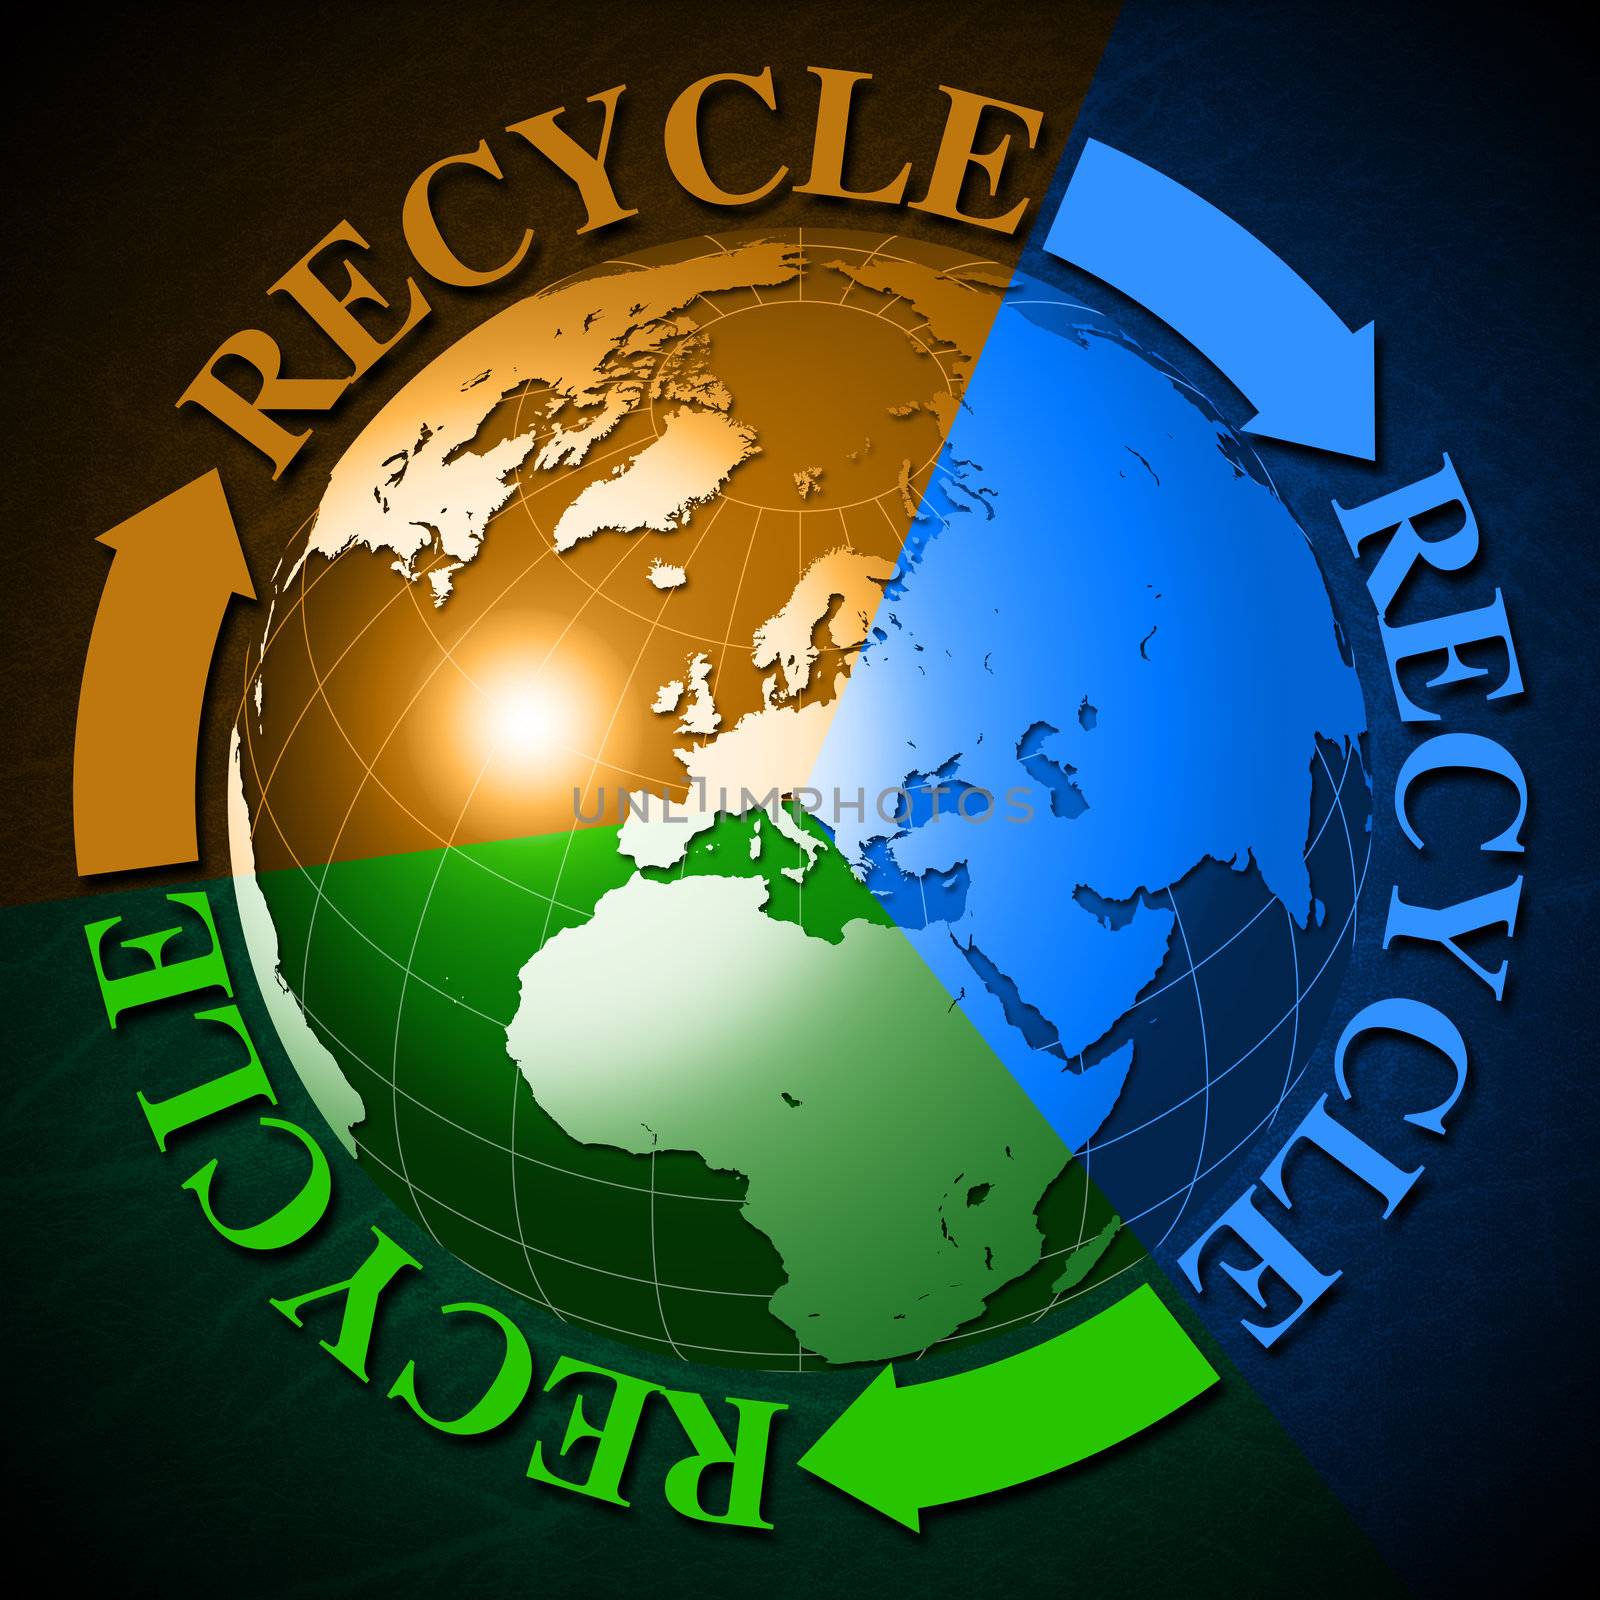 World recycle by catalby